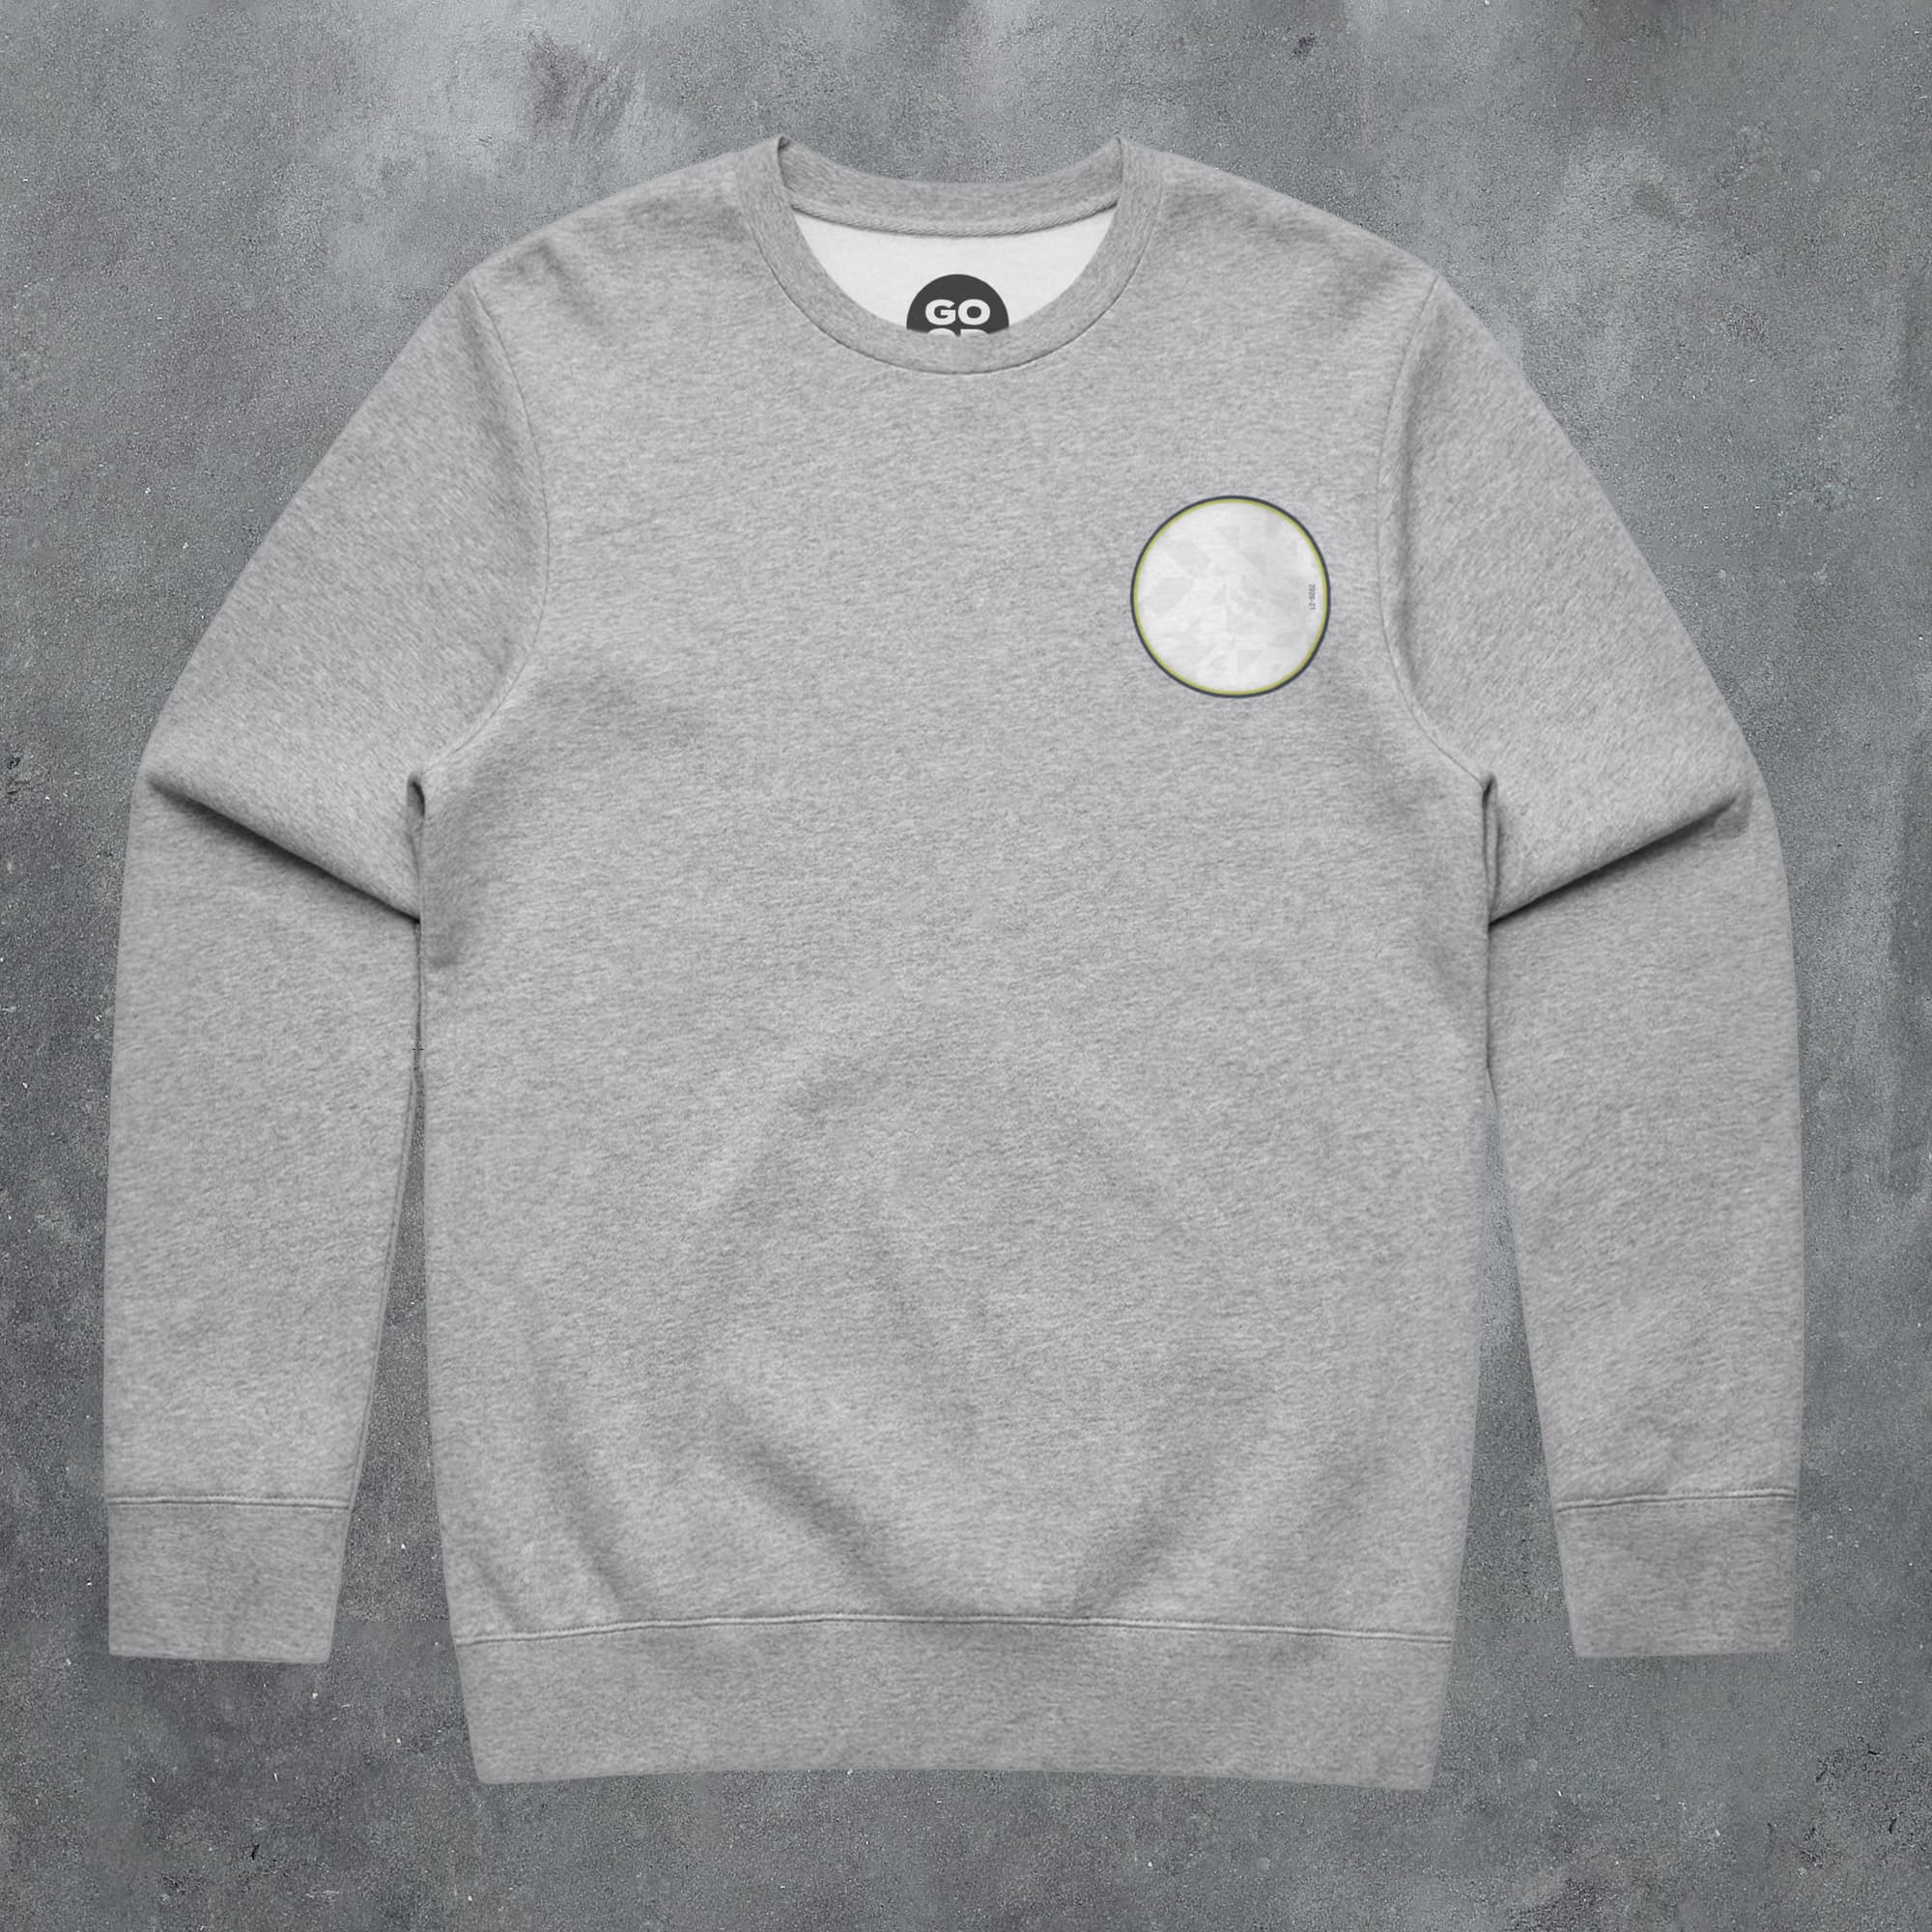 a grey sweatshirt with a white circle on it